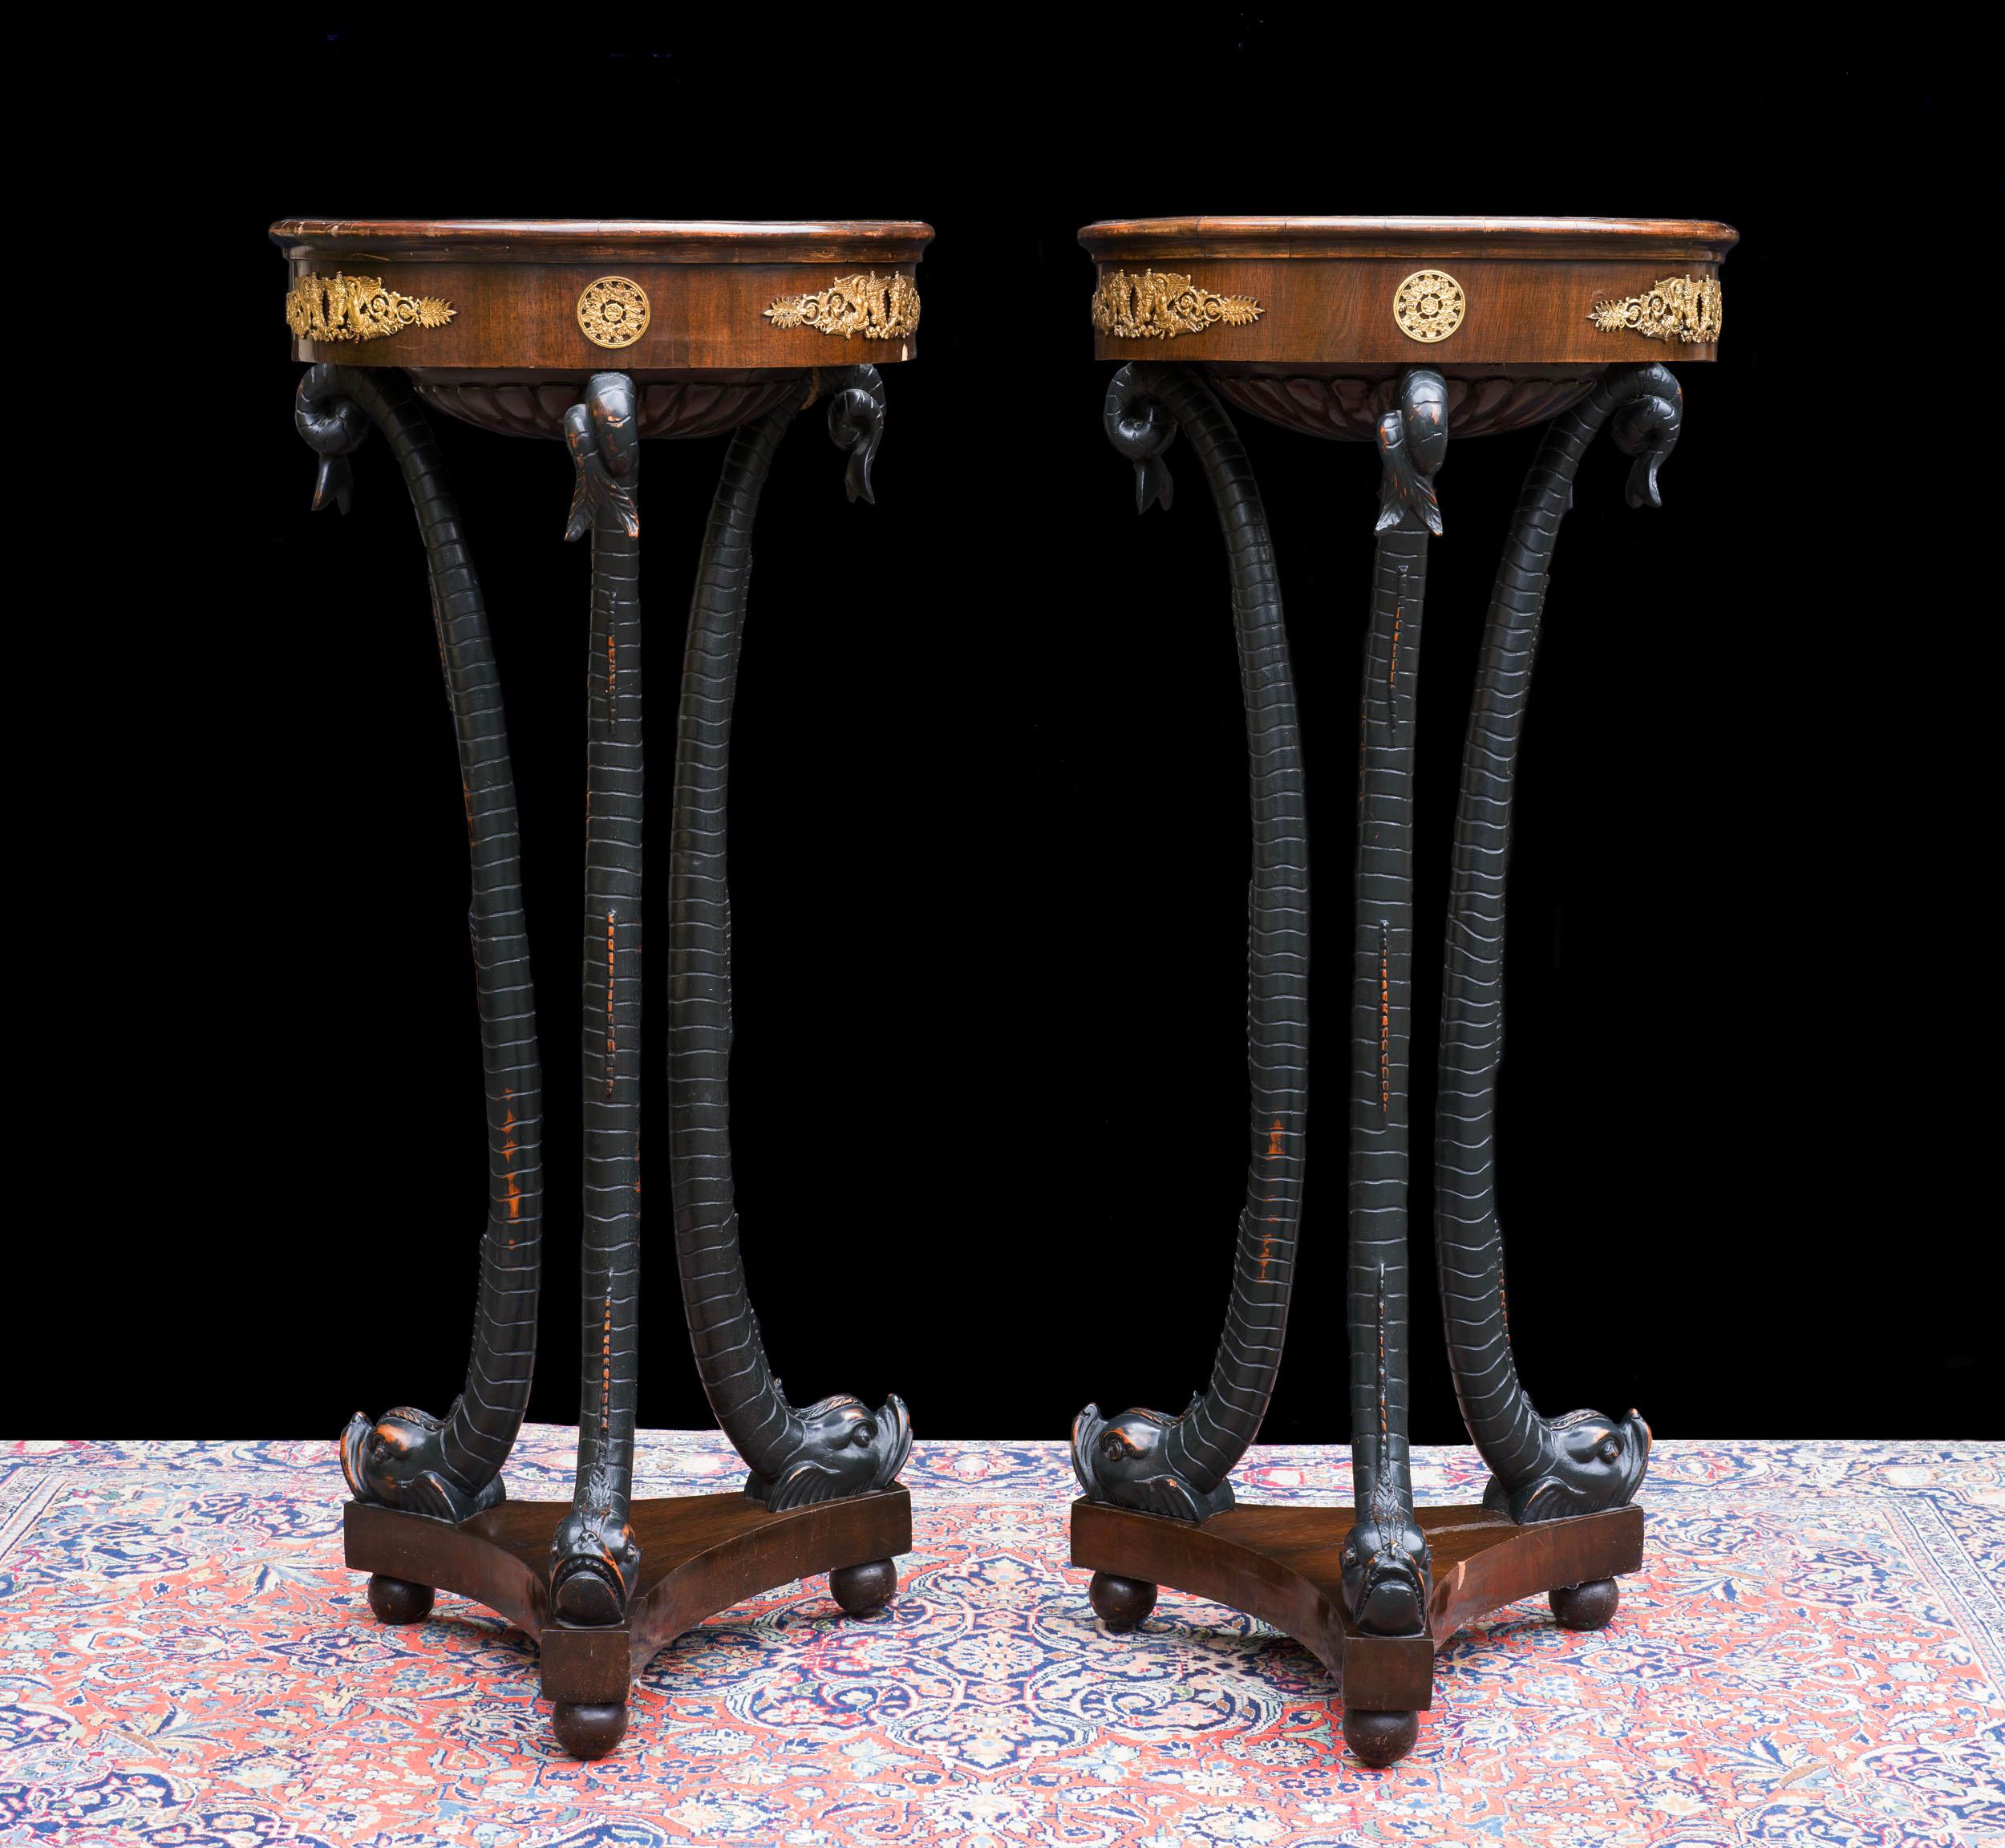 A rare pair of French torchères or gueridon tables, with inset marble tops over an ormolu mounted veneered top, over a triform base supporting legs modelled as Roman style dolphins, with an ebonised finish.
A great pair of multifunctional tables,